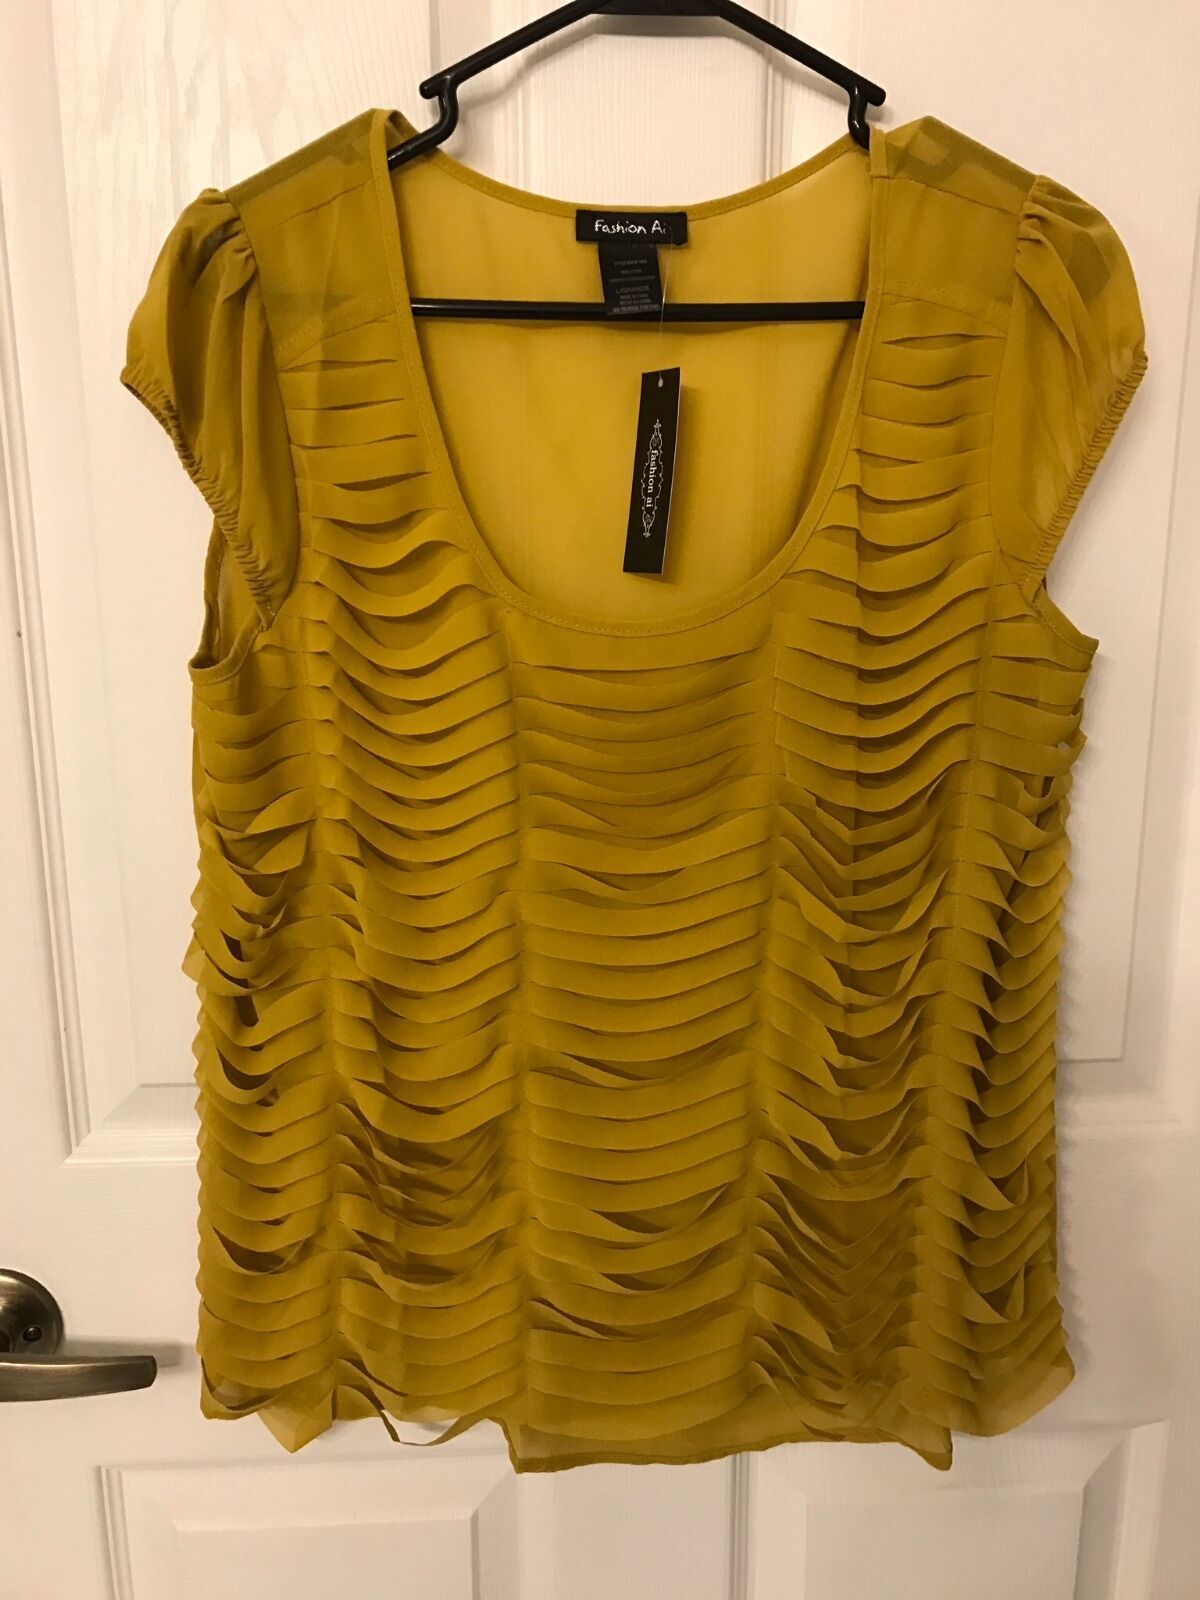 Primary image for Fashion Ai Brand Sheer Short Sleeve Yellow Shirt W Cut Outs Women's Size L NWT